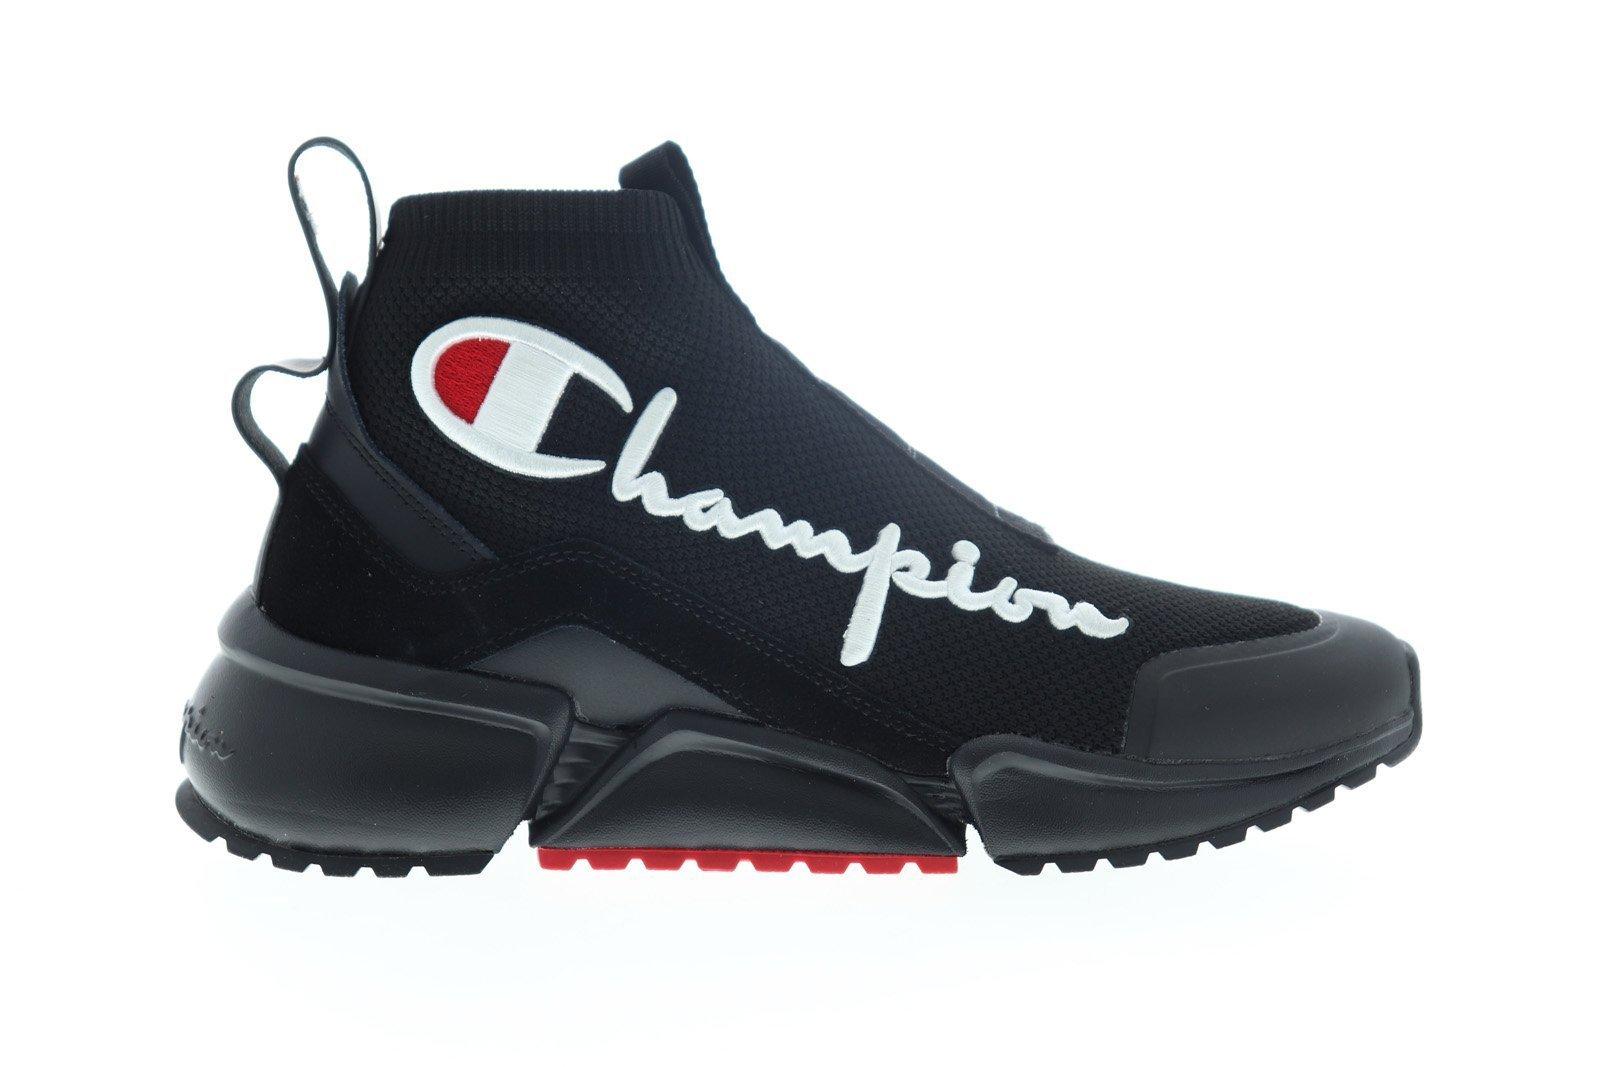 navy blue champion shoes